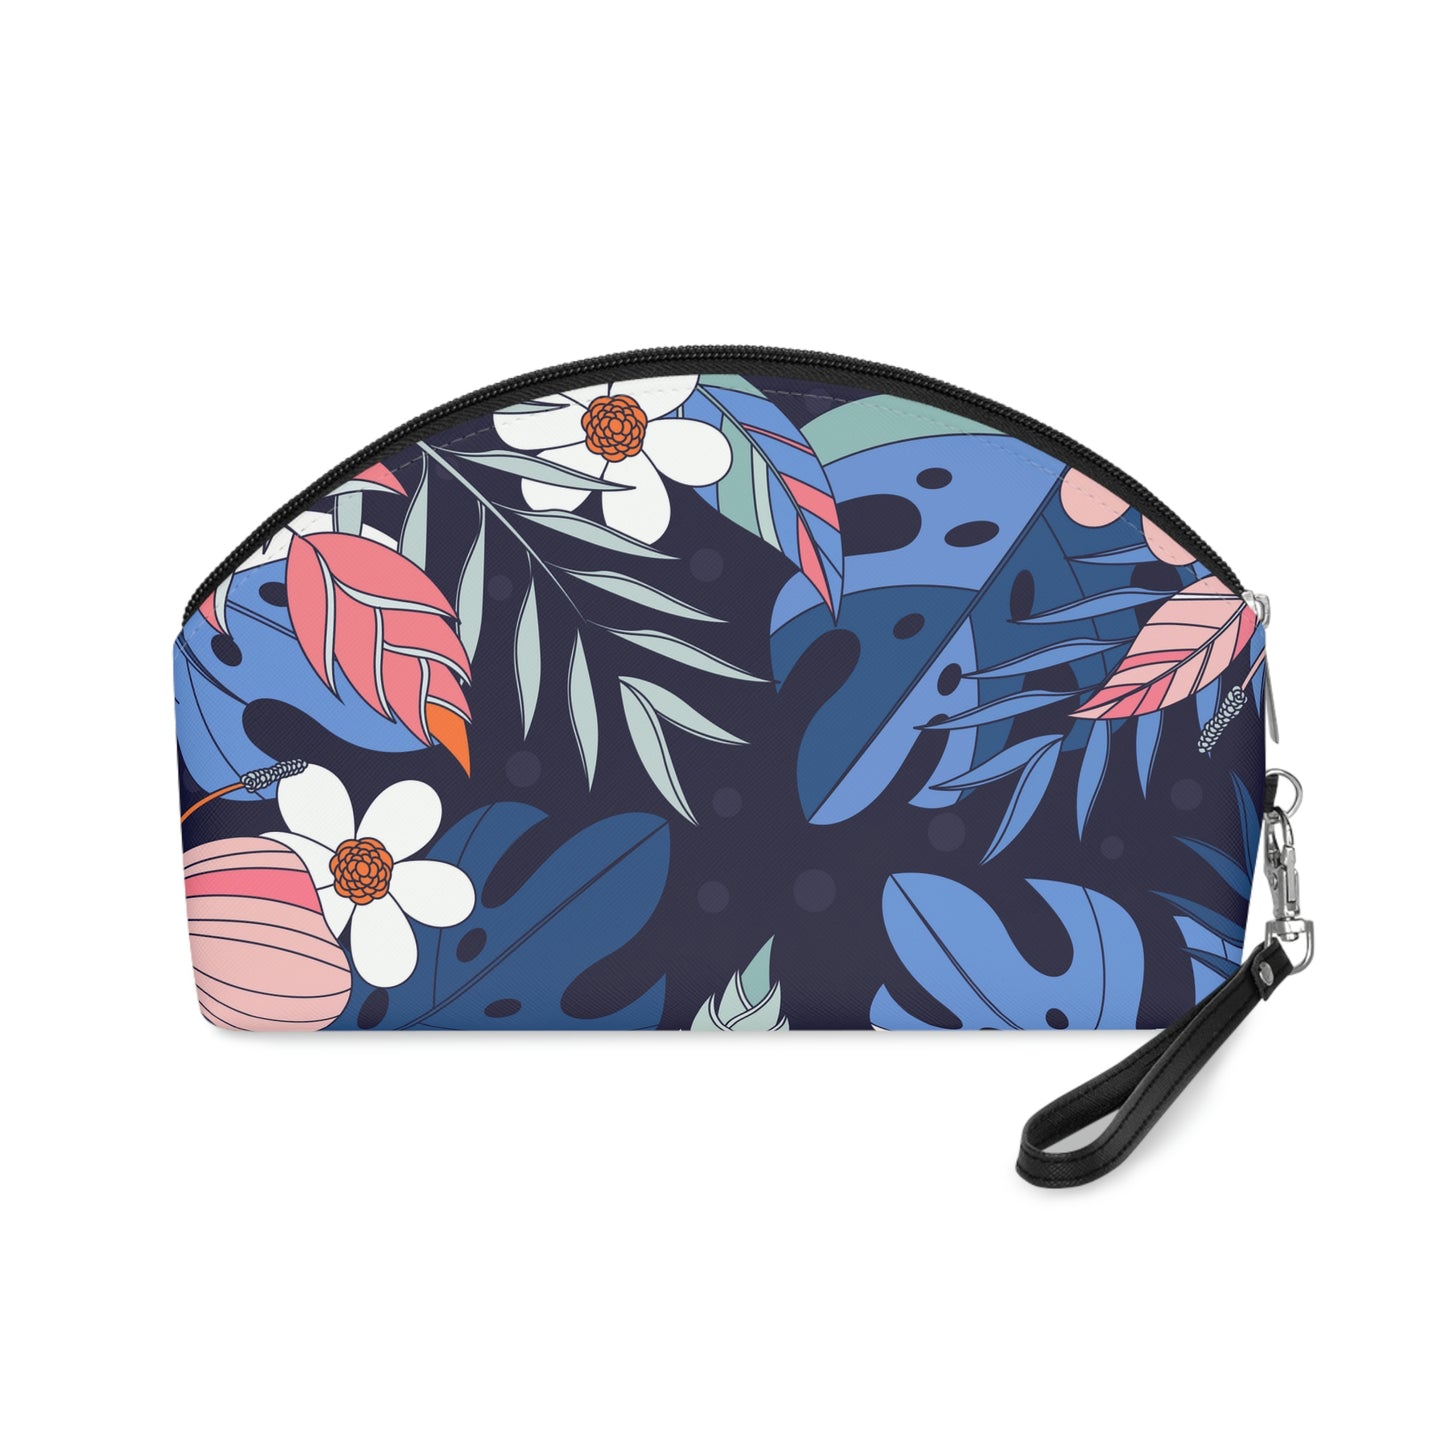 From Paradise with Love-Makeup Bag